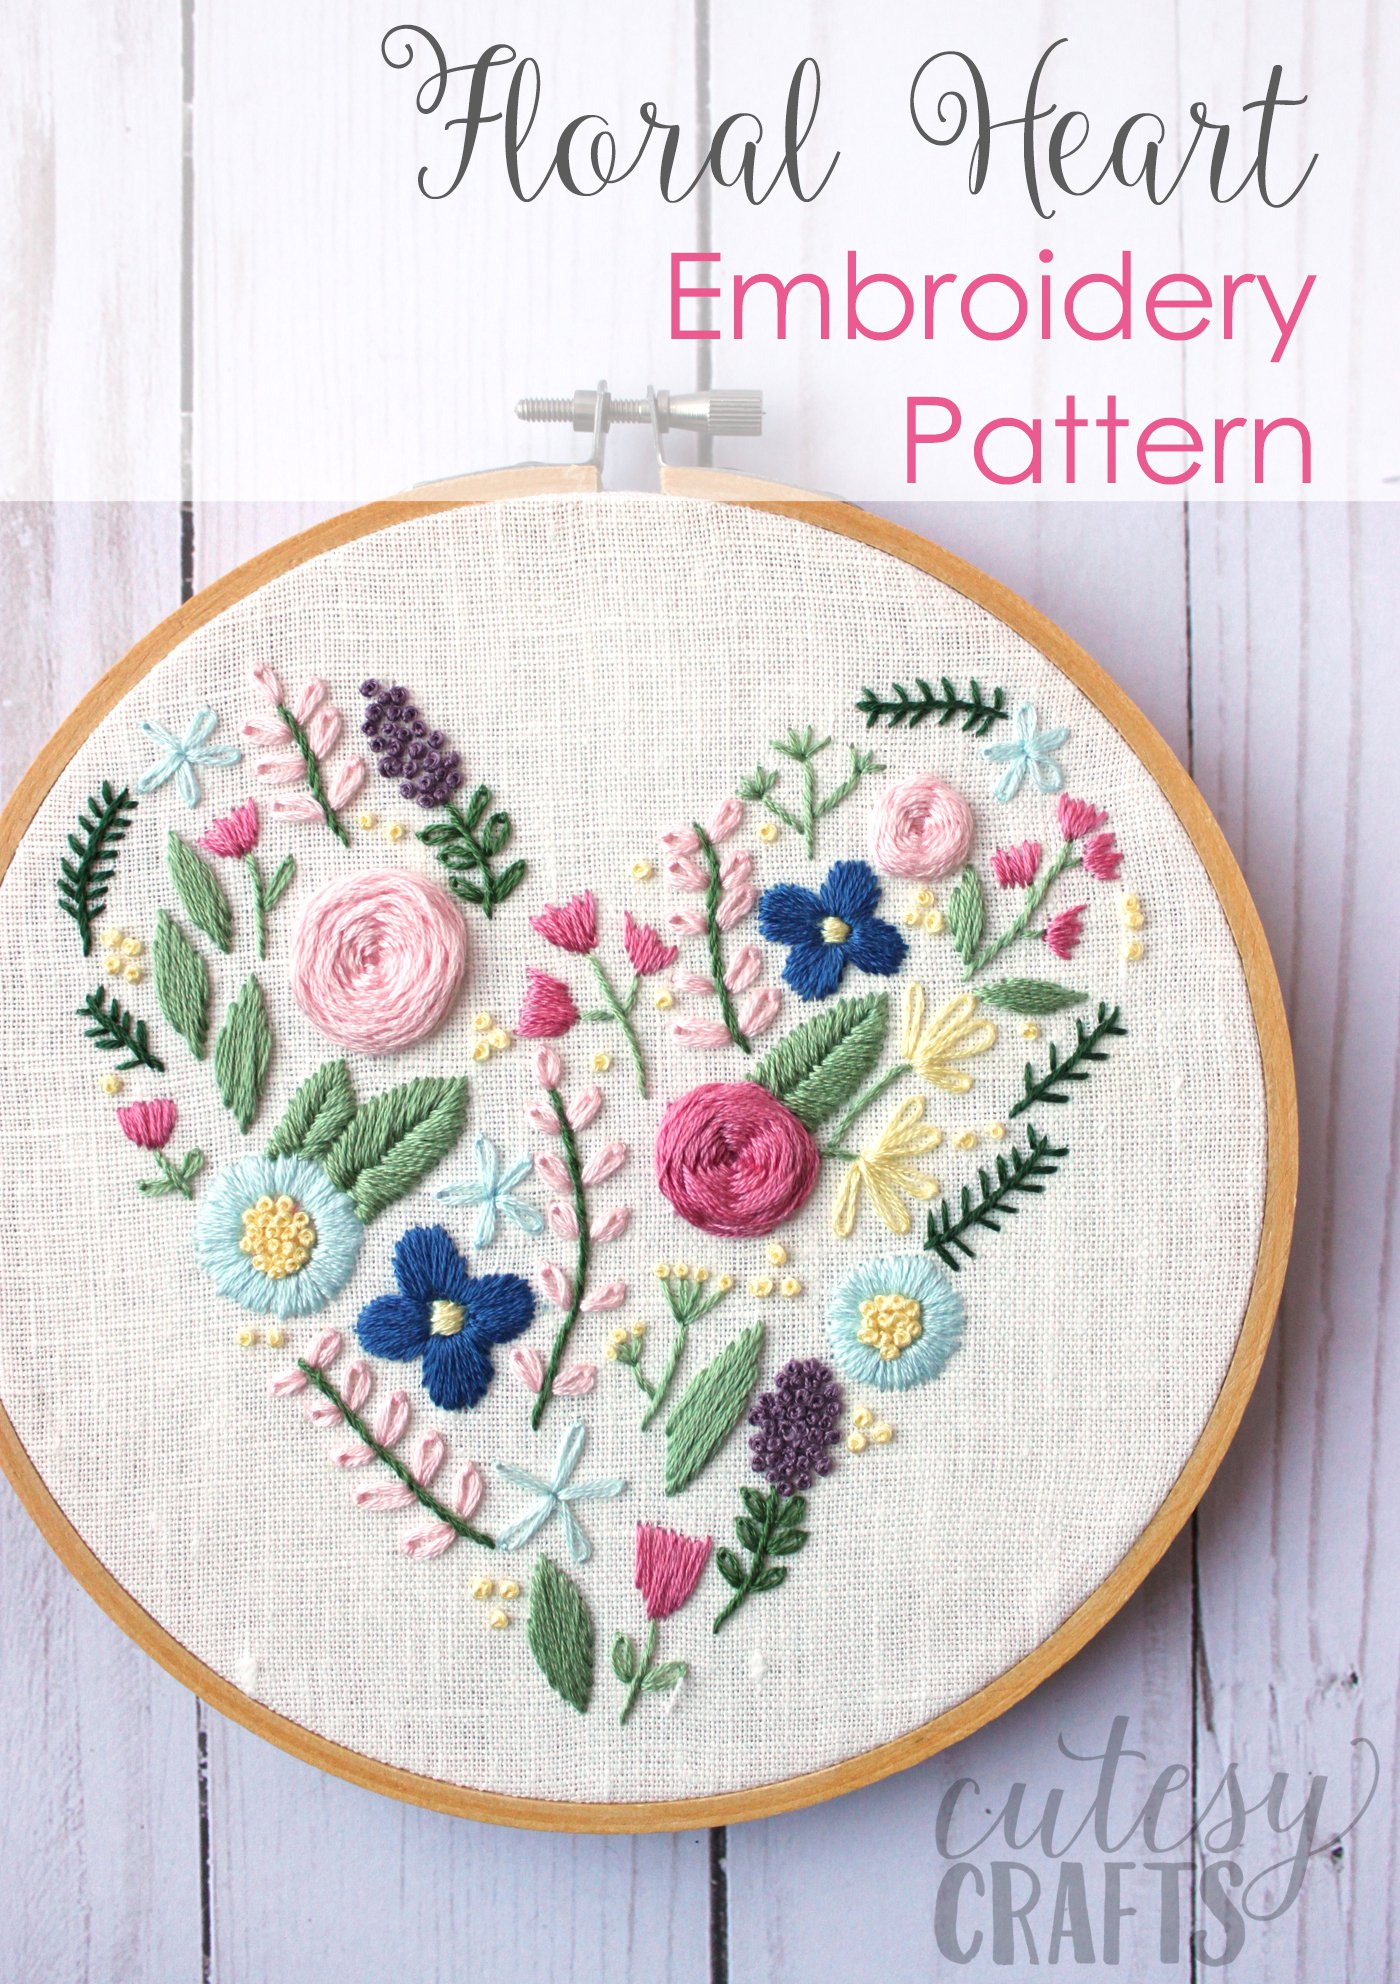 Hand Embroidery Patterns For Beginners Floral Heart Hand Embroidery Pattern The Polka Dot Chair